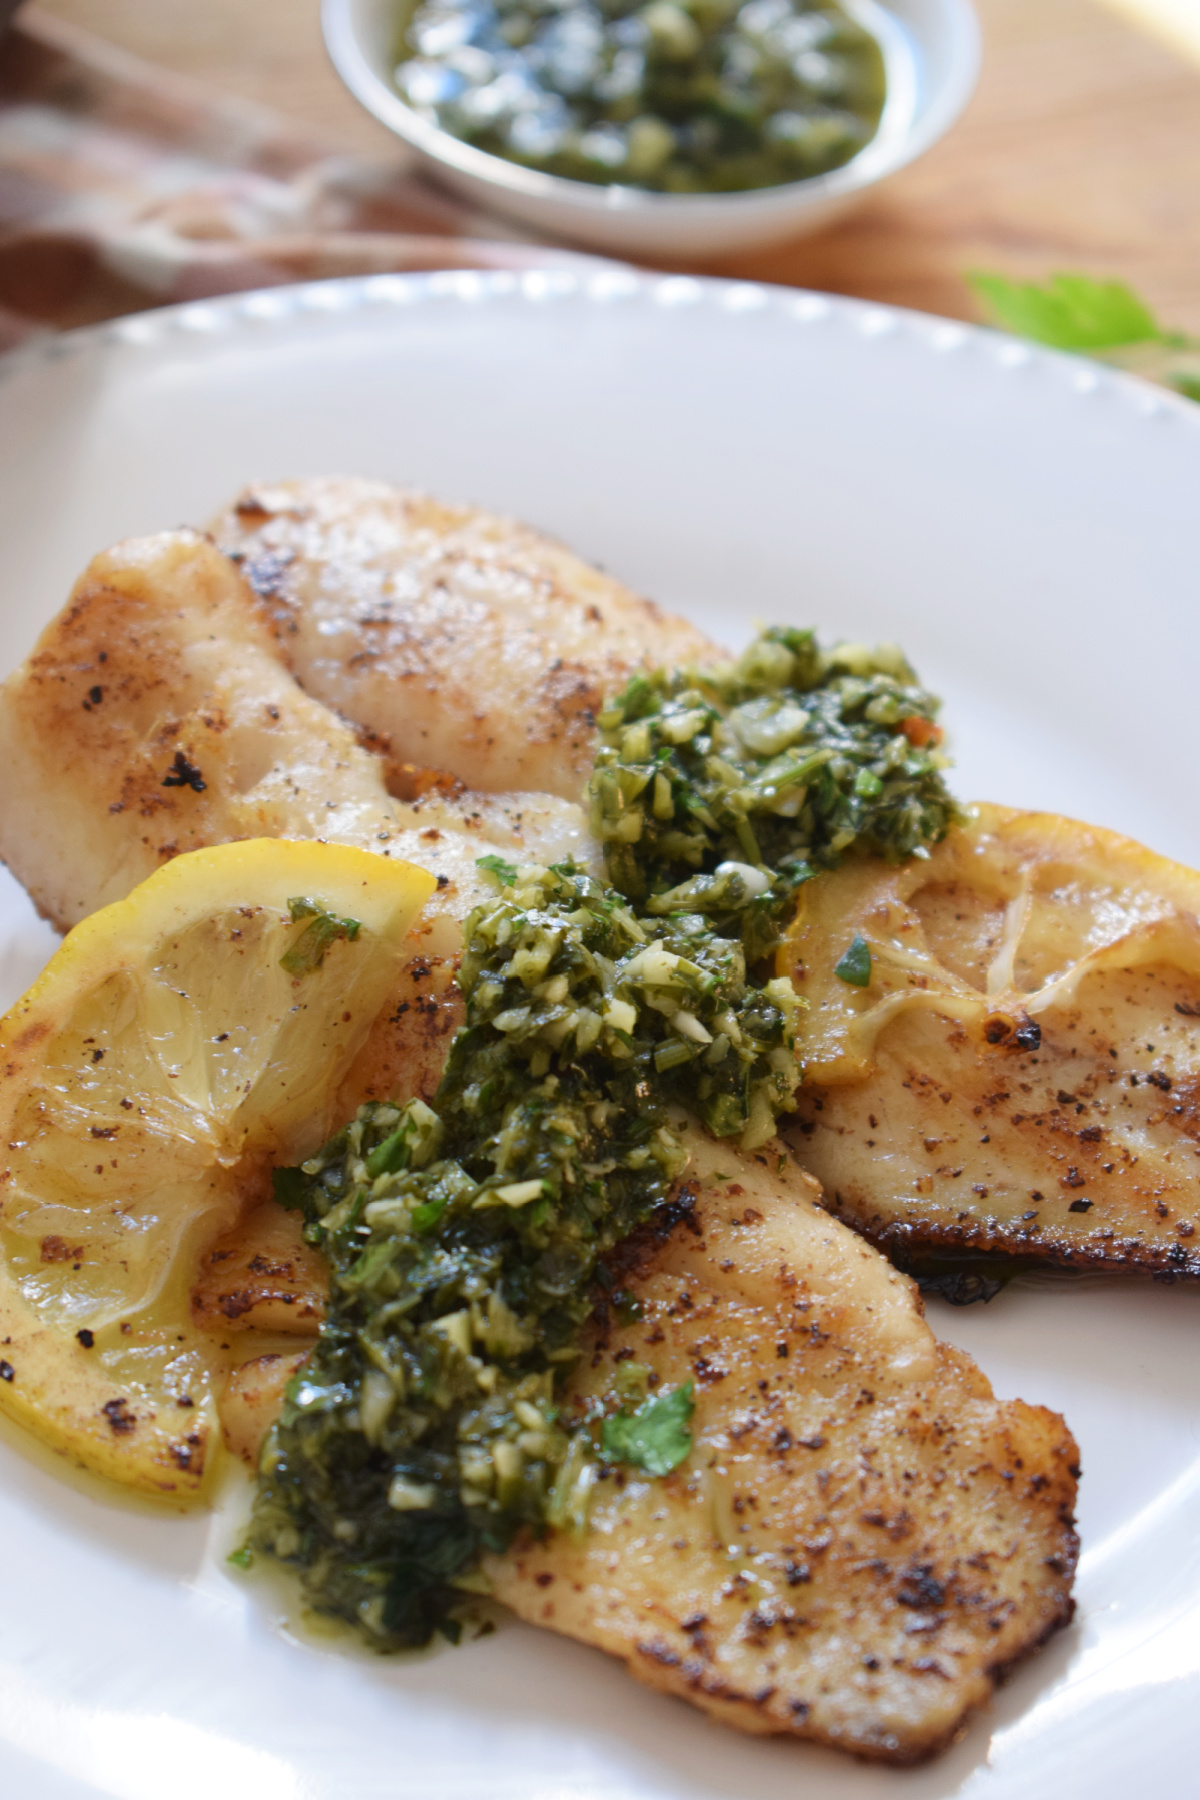 Pan Fried Perch With Lemon Parsley